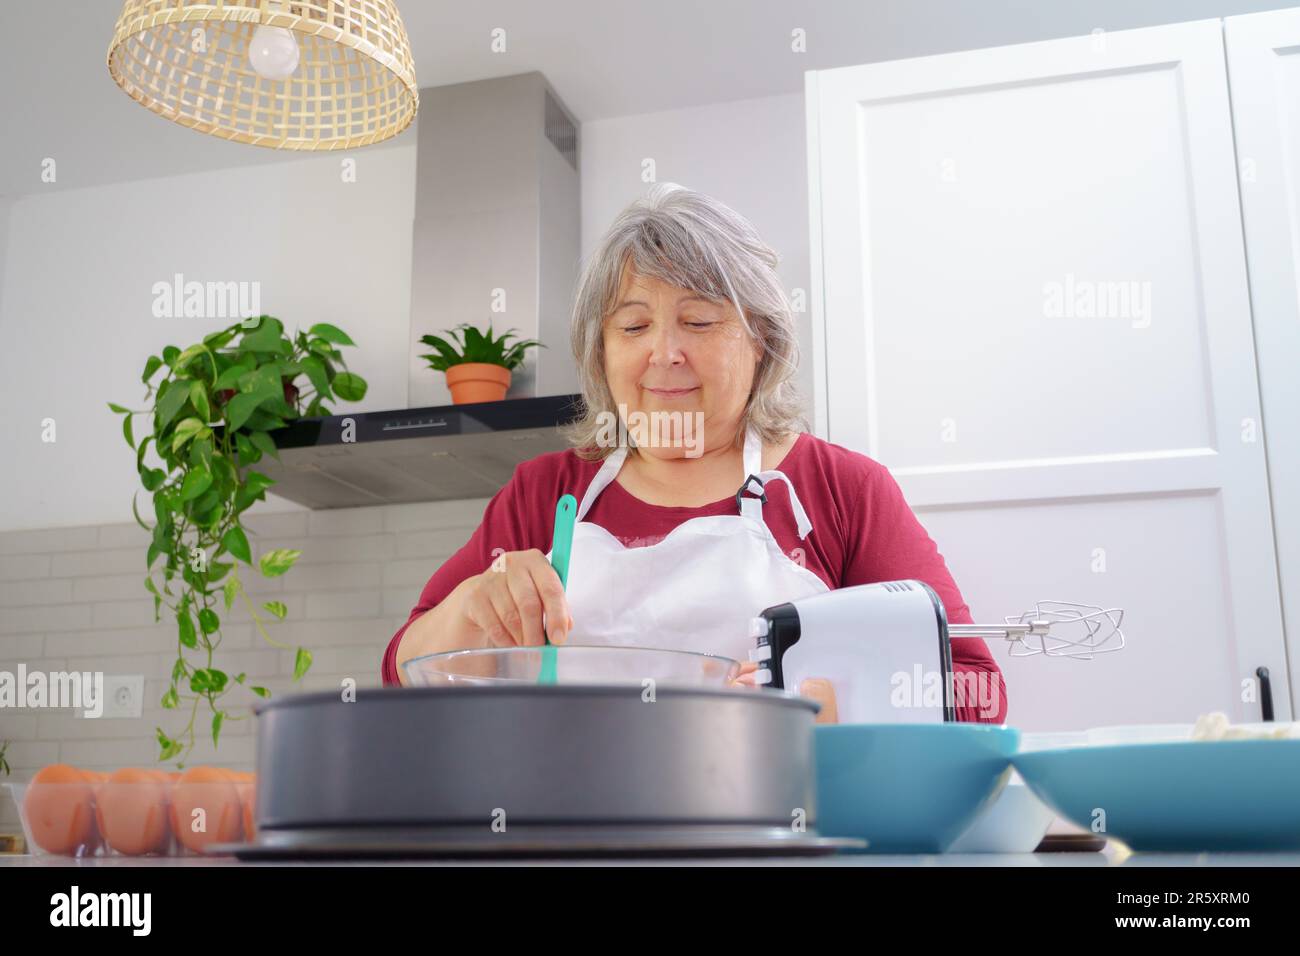 Female cook in white apron beating eggs in a bowl with a spatula Stock Photo